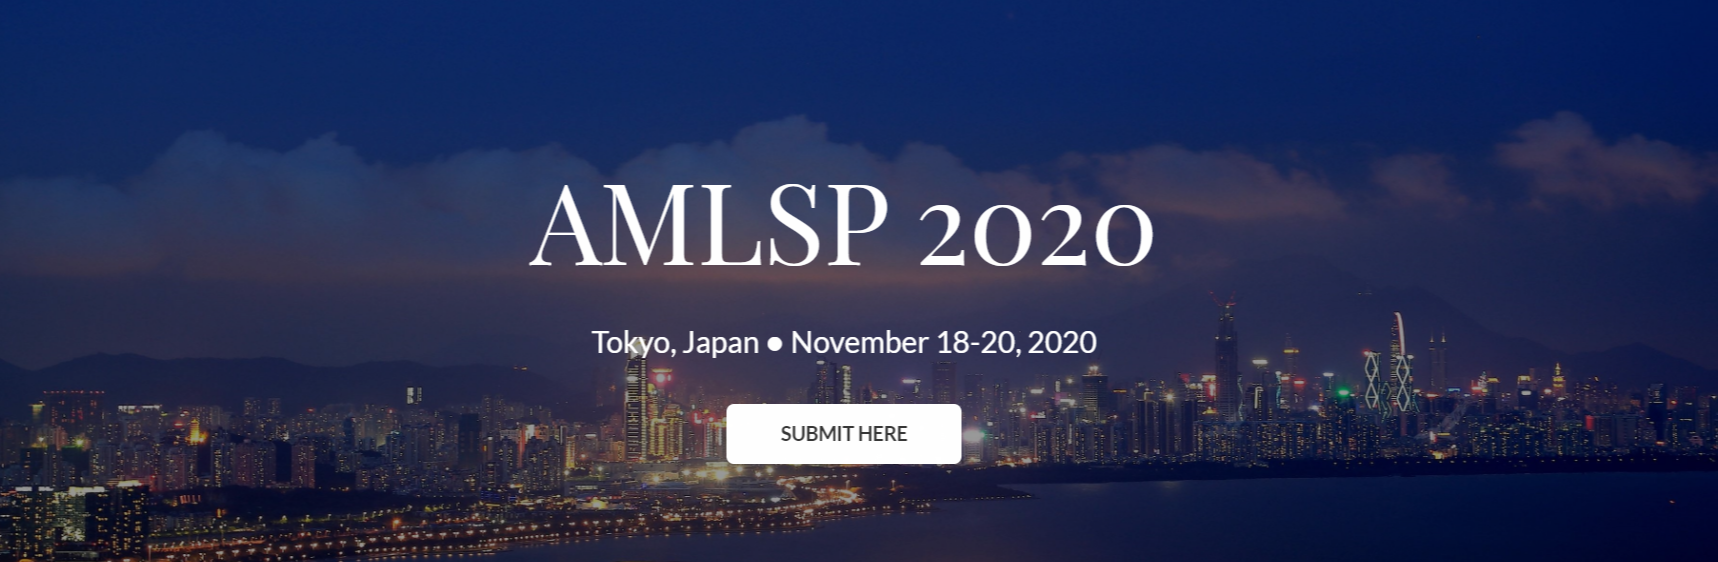 2020 2nd International Conference on Algorithms, Machine Learning and Signal Processing (AMLSP 2020), Shenzhen, Guangdong, China